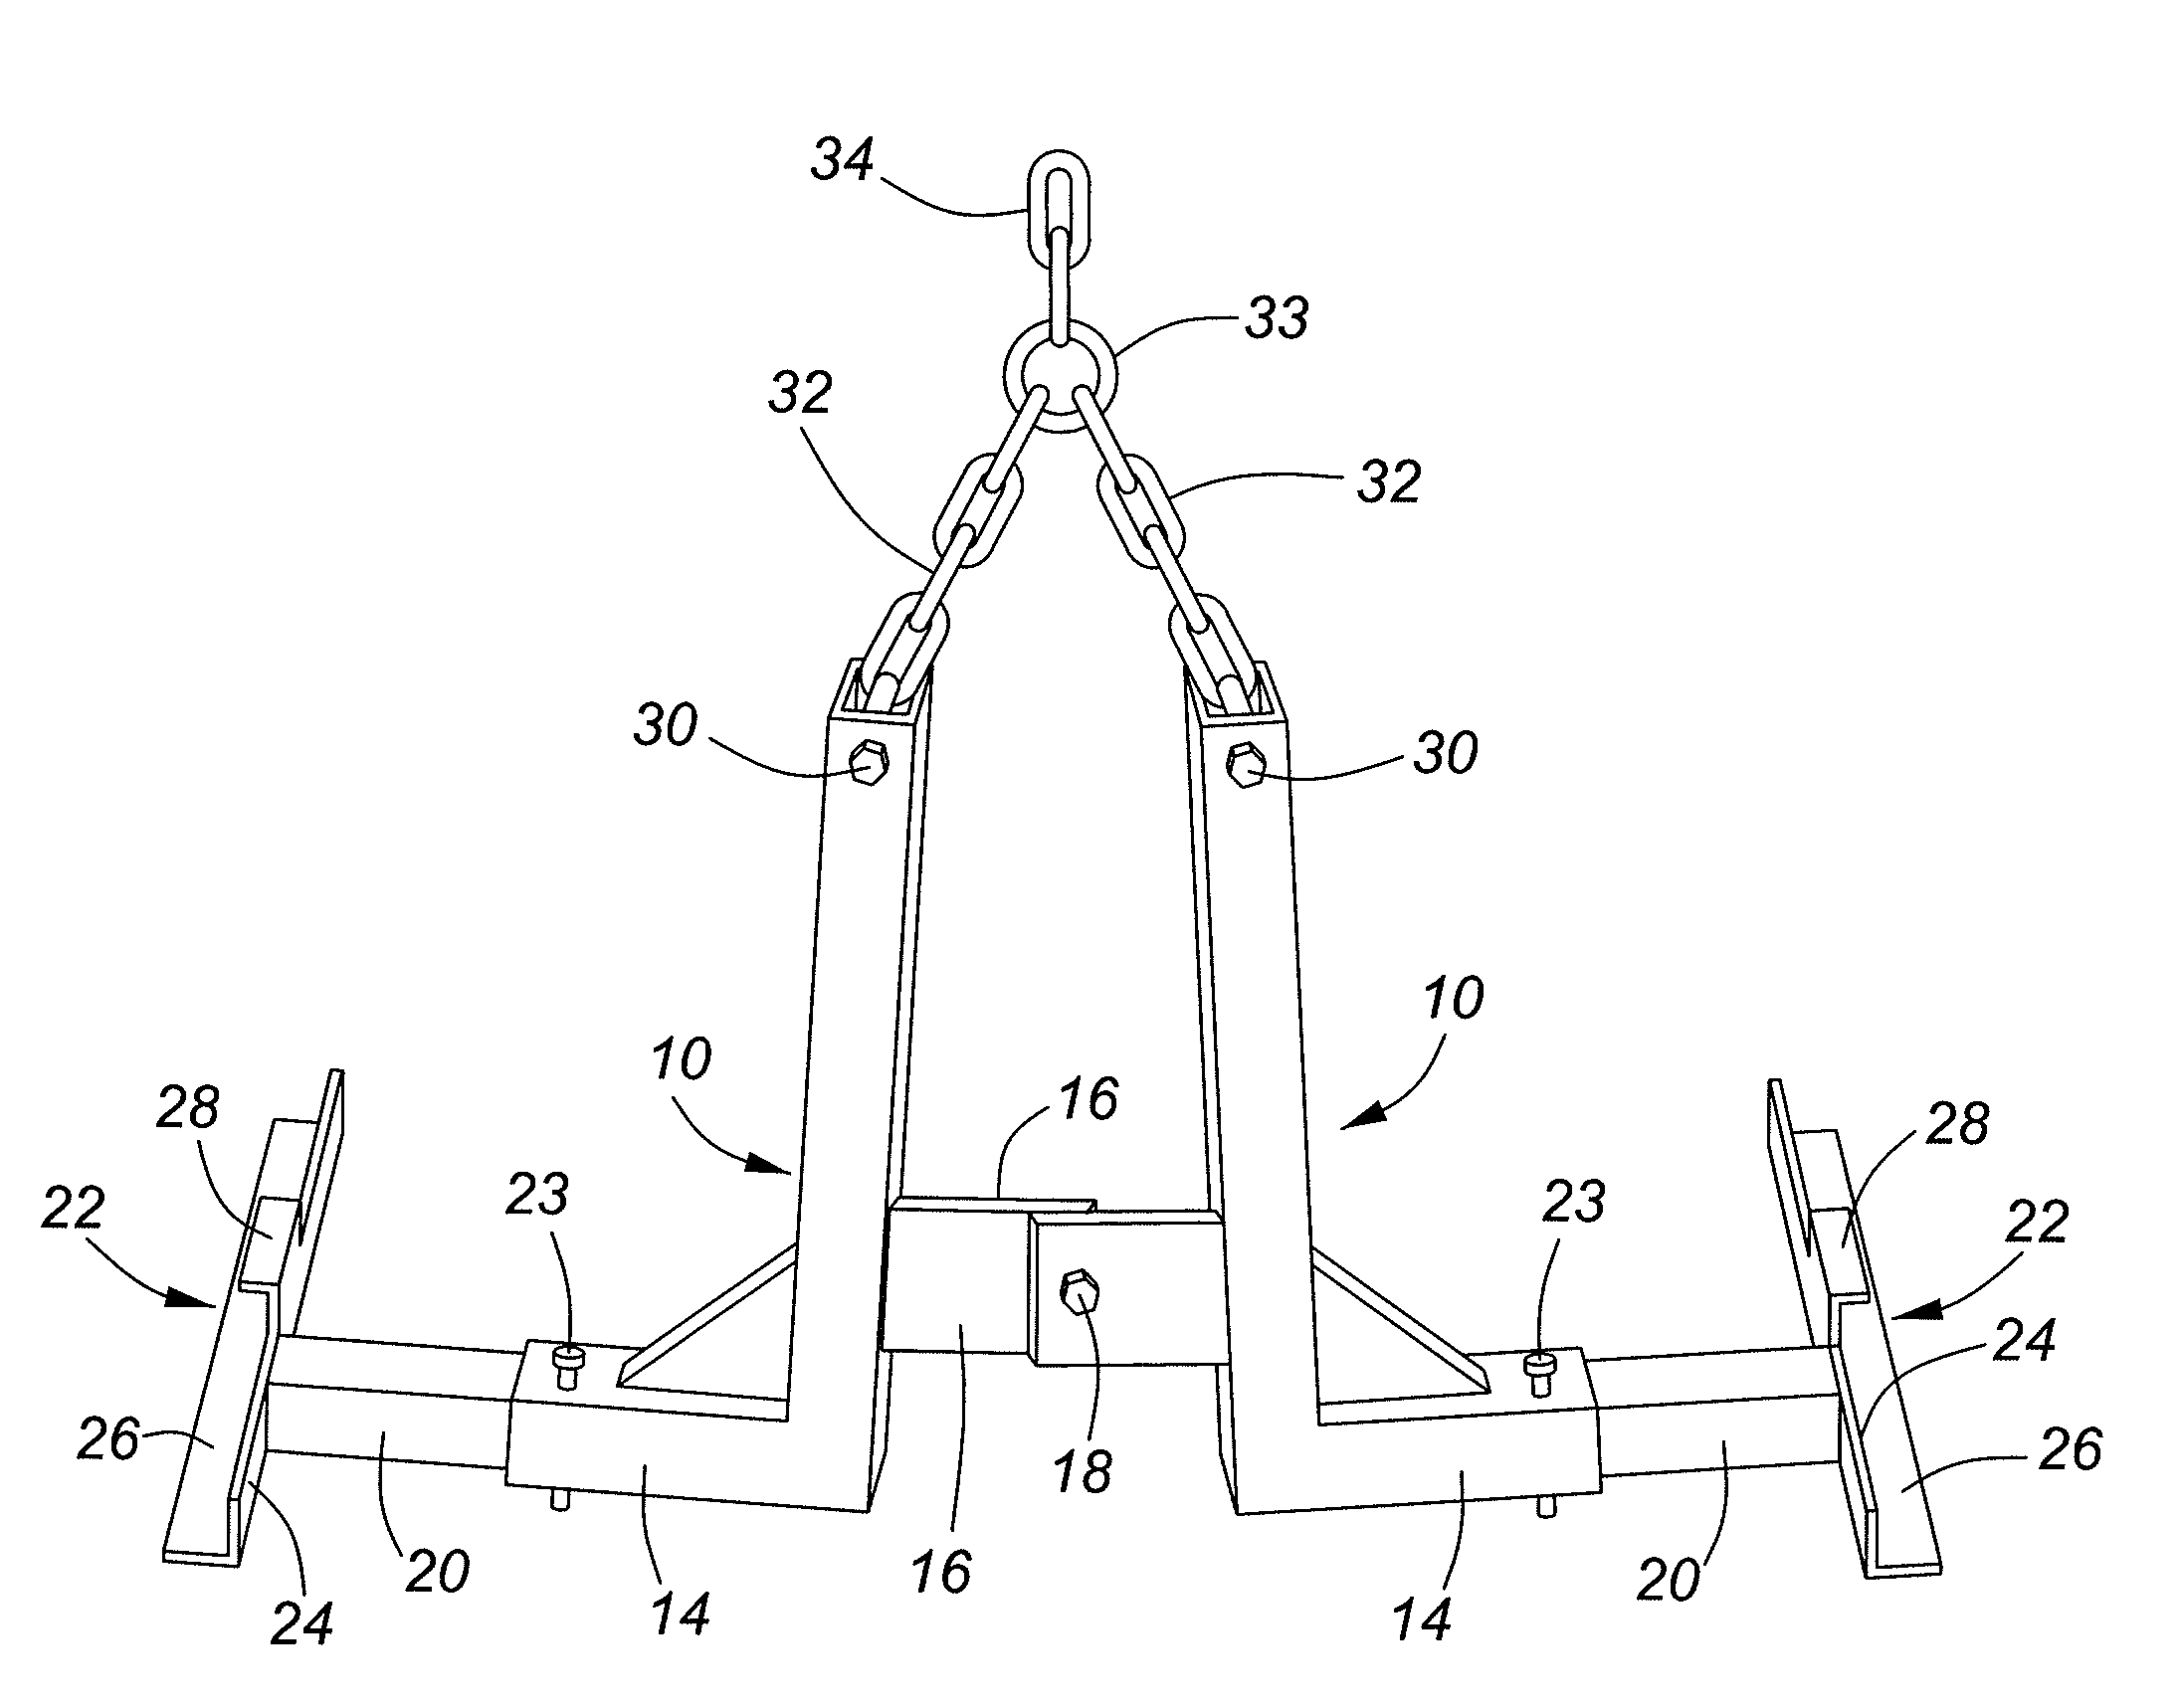 Lifting apparatus for lifting hollow frames such as manhole or catchment basin frames